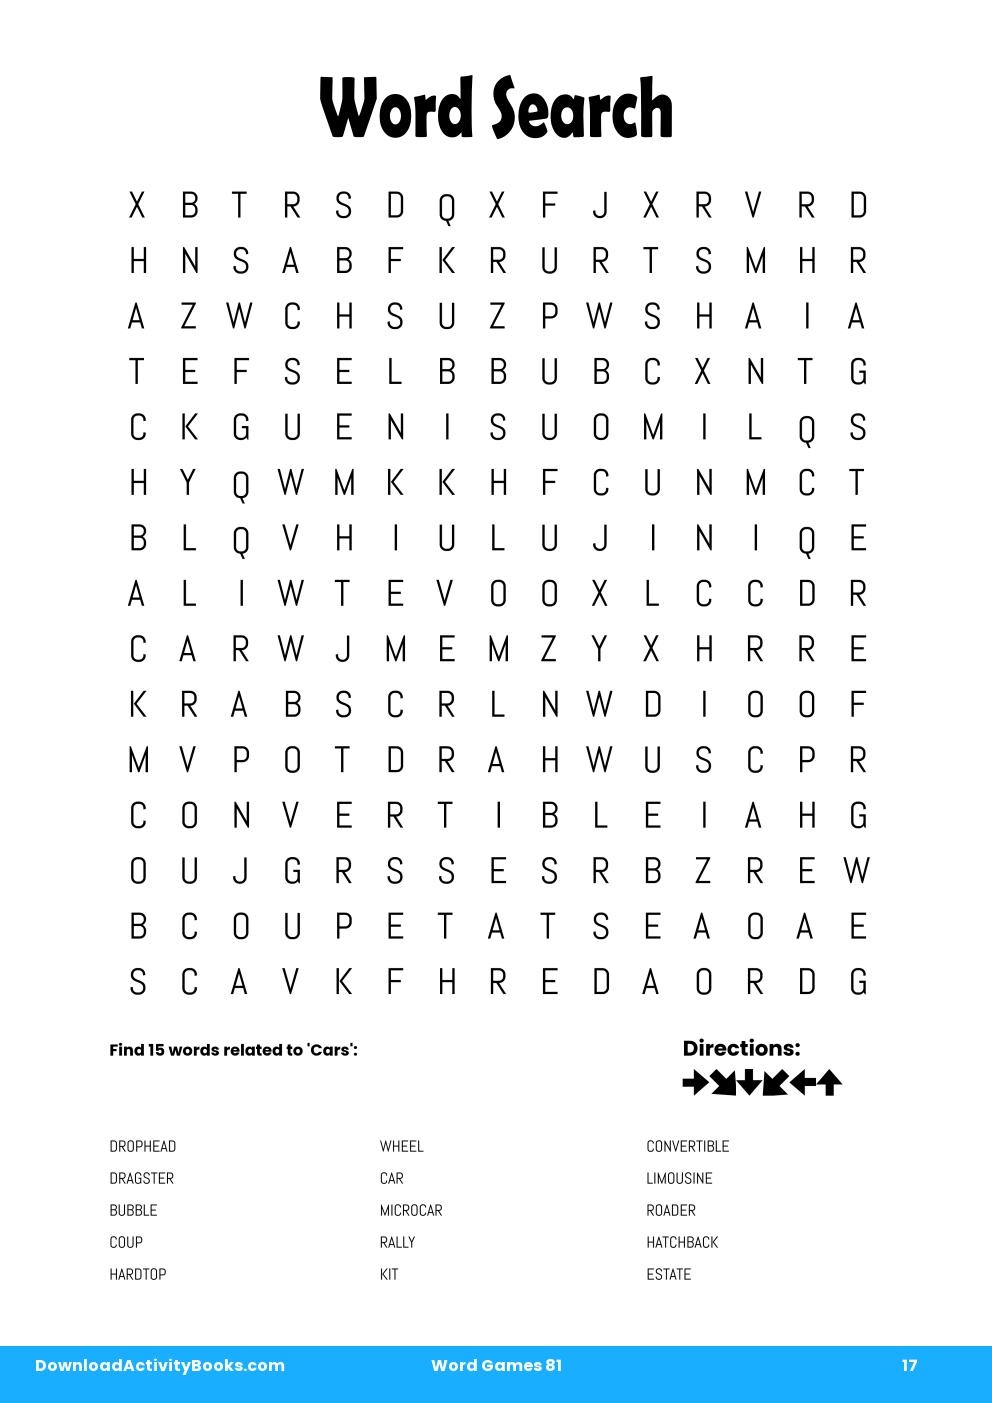 Word Search in Word Games 81